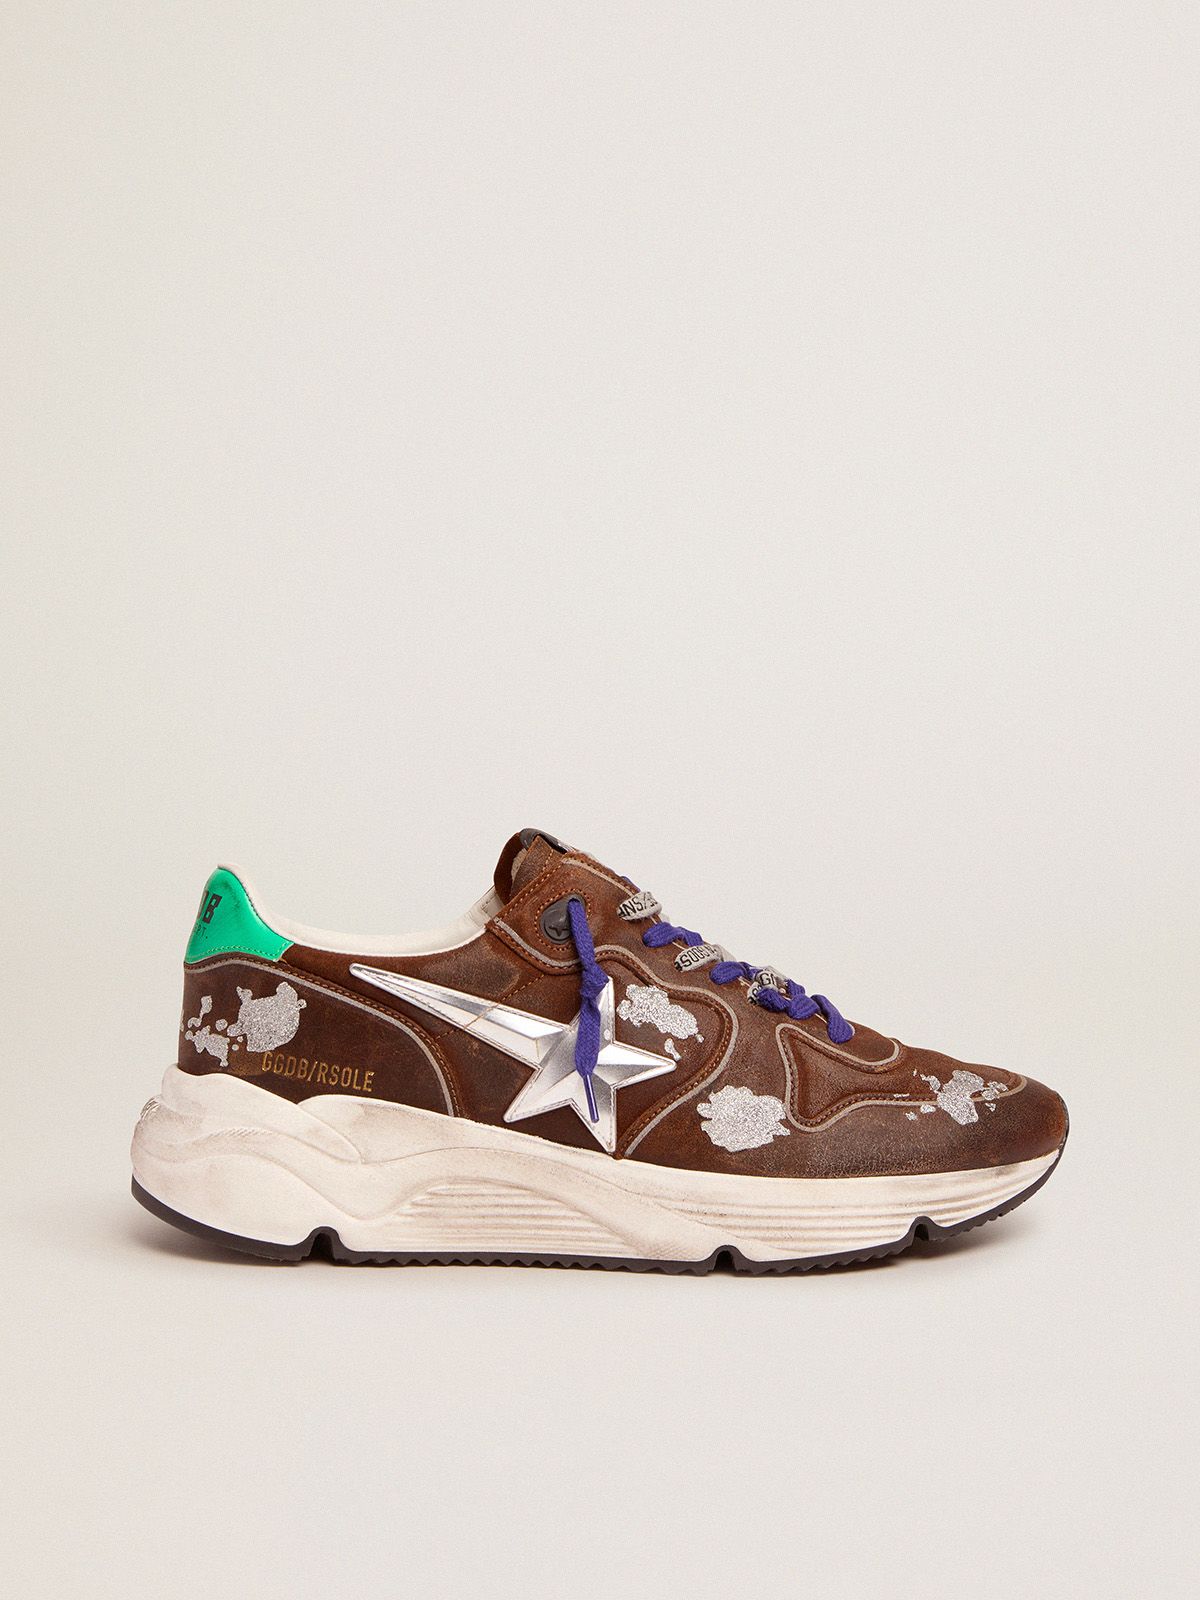 Running Sole sneakers in cognac-colored suede with 3D star | 